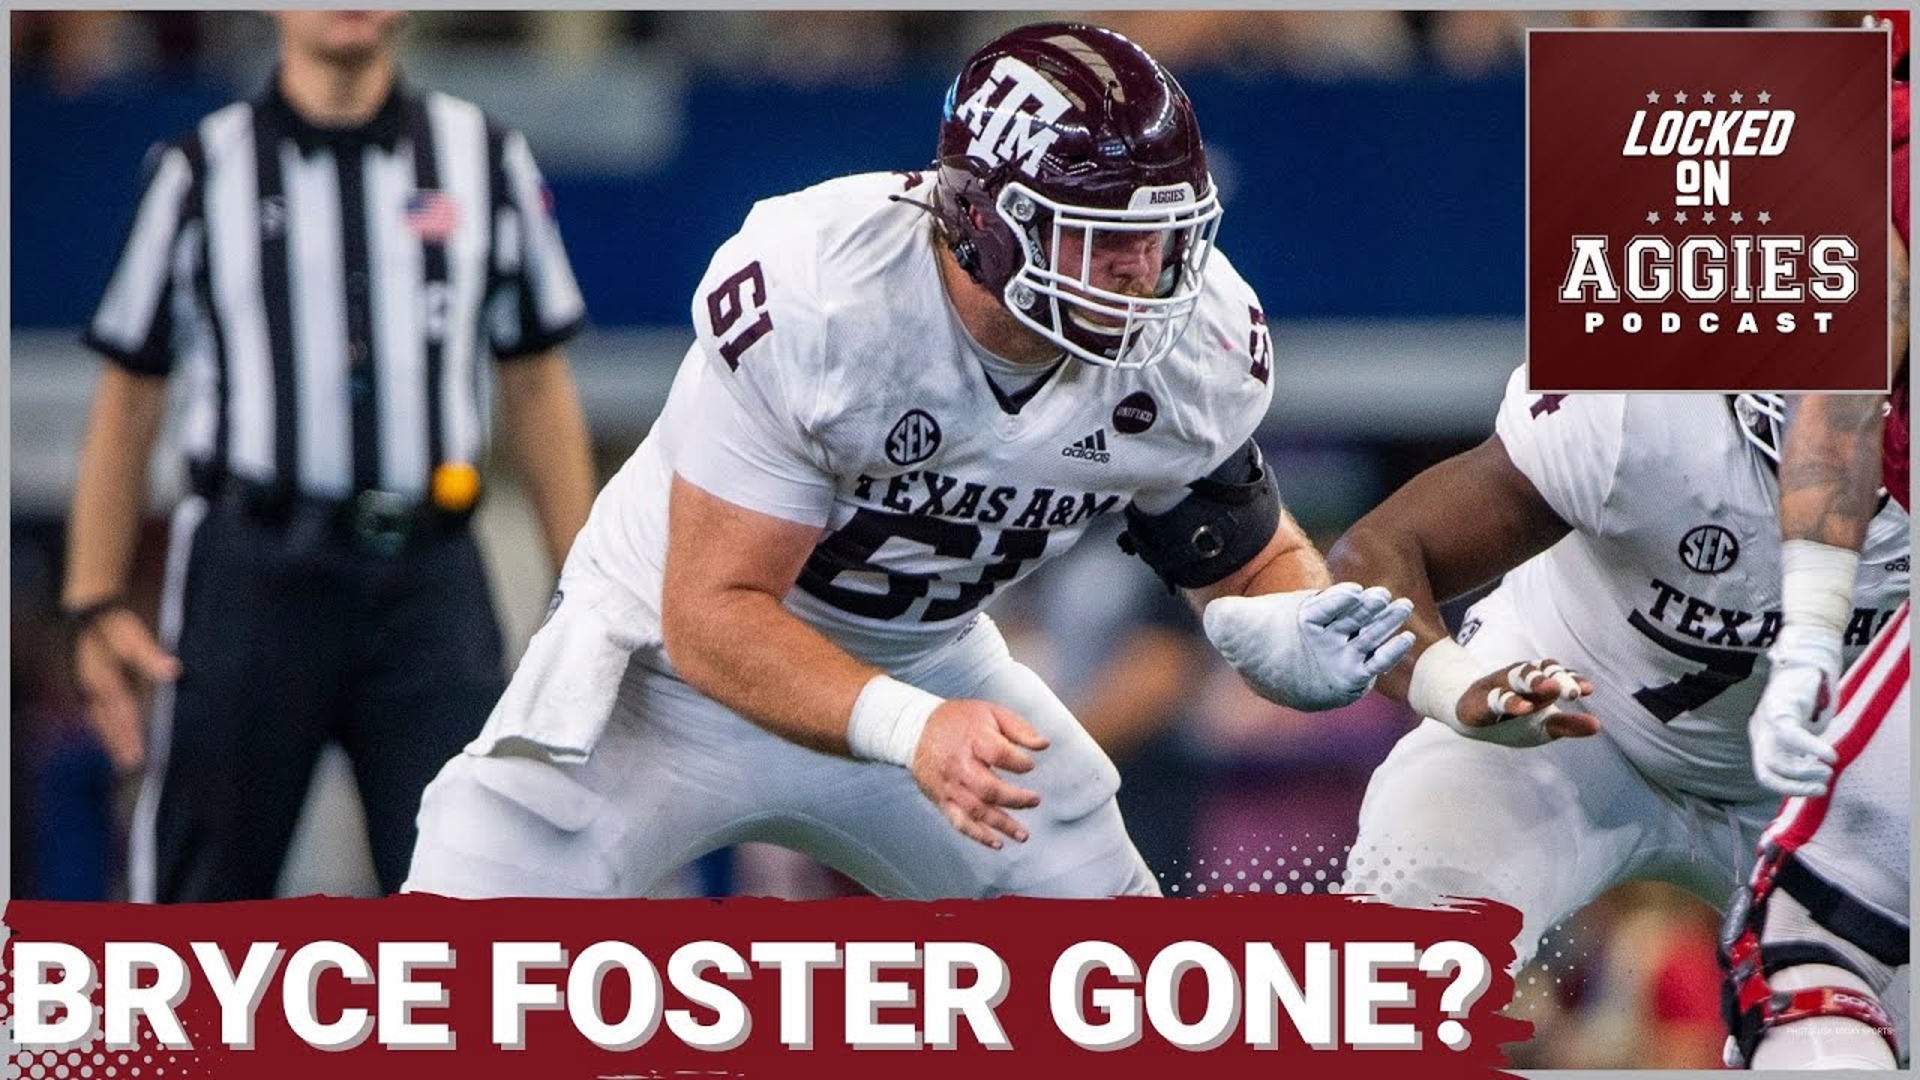 On today's episode of the Locked On Aggies Podcast, host Andrew Stefaniak talks about Texas A&M starting center Bryce Foster